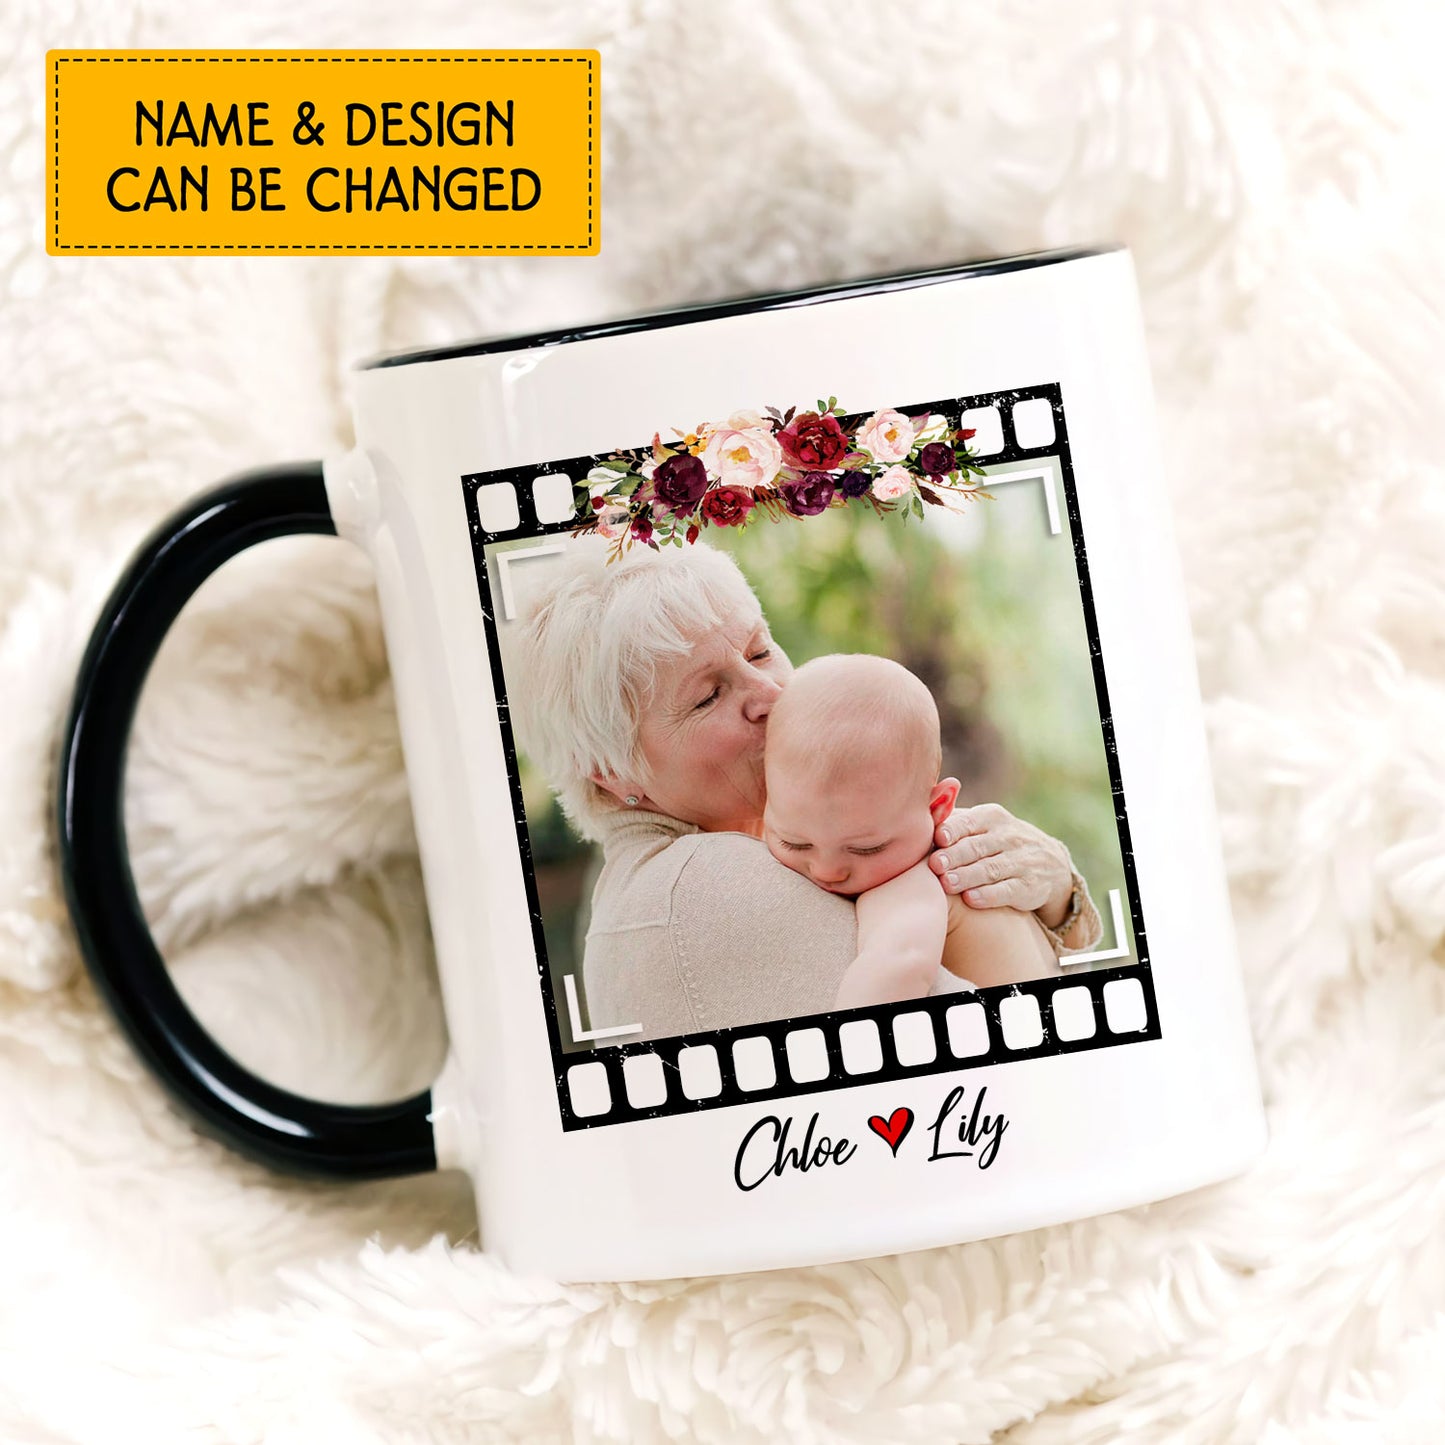 Only The Best Moms Get Promoted To Grandma Custom Mug With Your Name & Photo